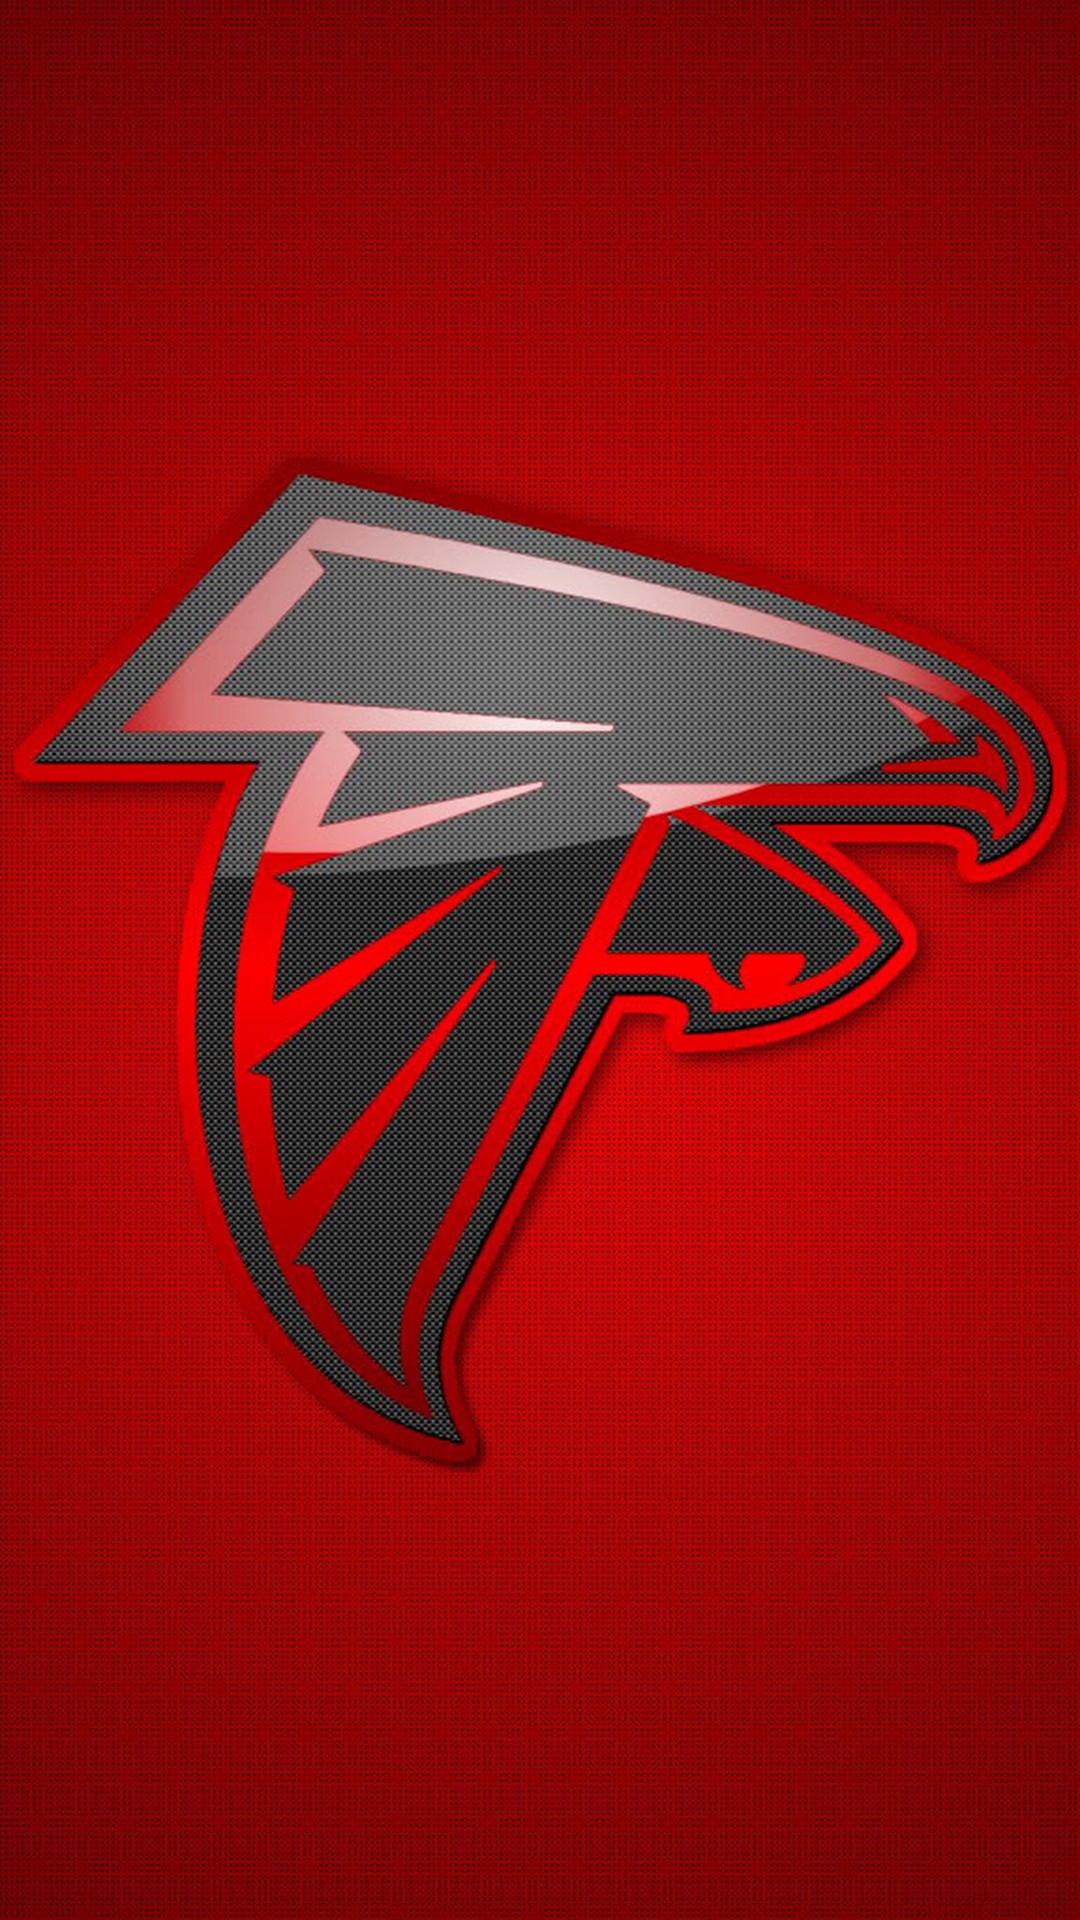 Atlanta Falcons iPhone Wallpaper Home Screen with high-resolution 1080x1920 pixel. Download and set as wallpaper for Apple iPhone X, XS Max, XR, 8, 7, 6, SE, iPad, Android